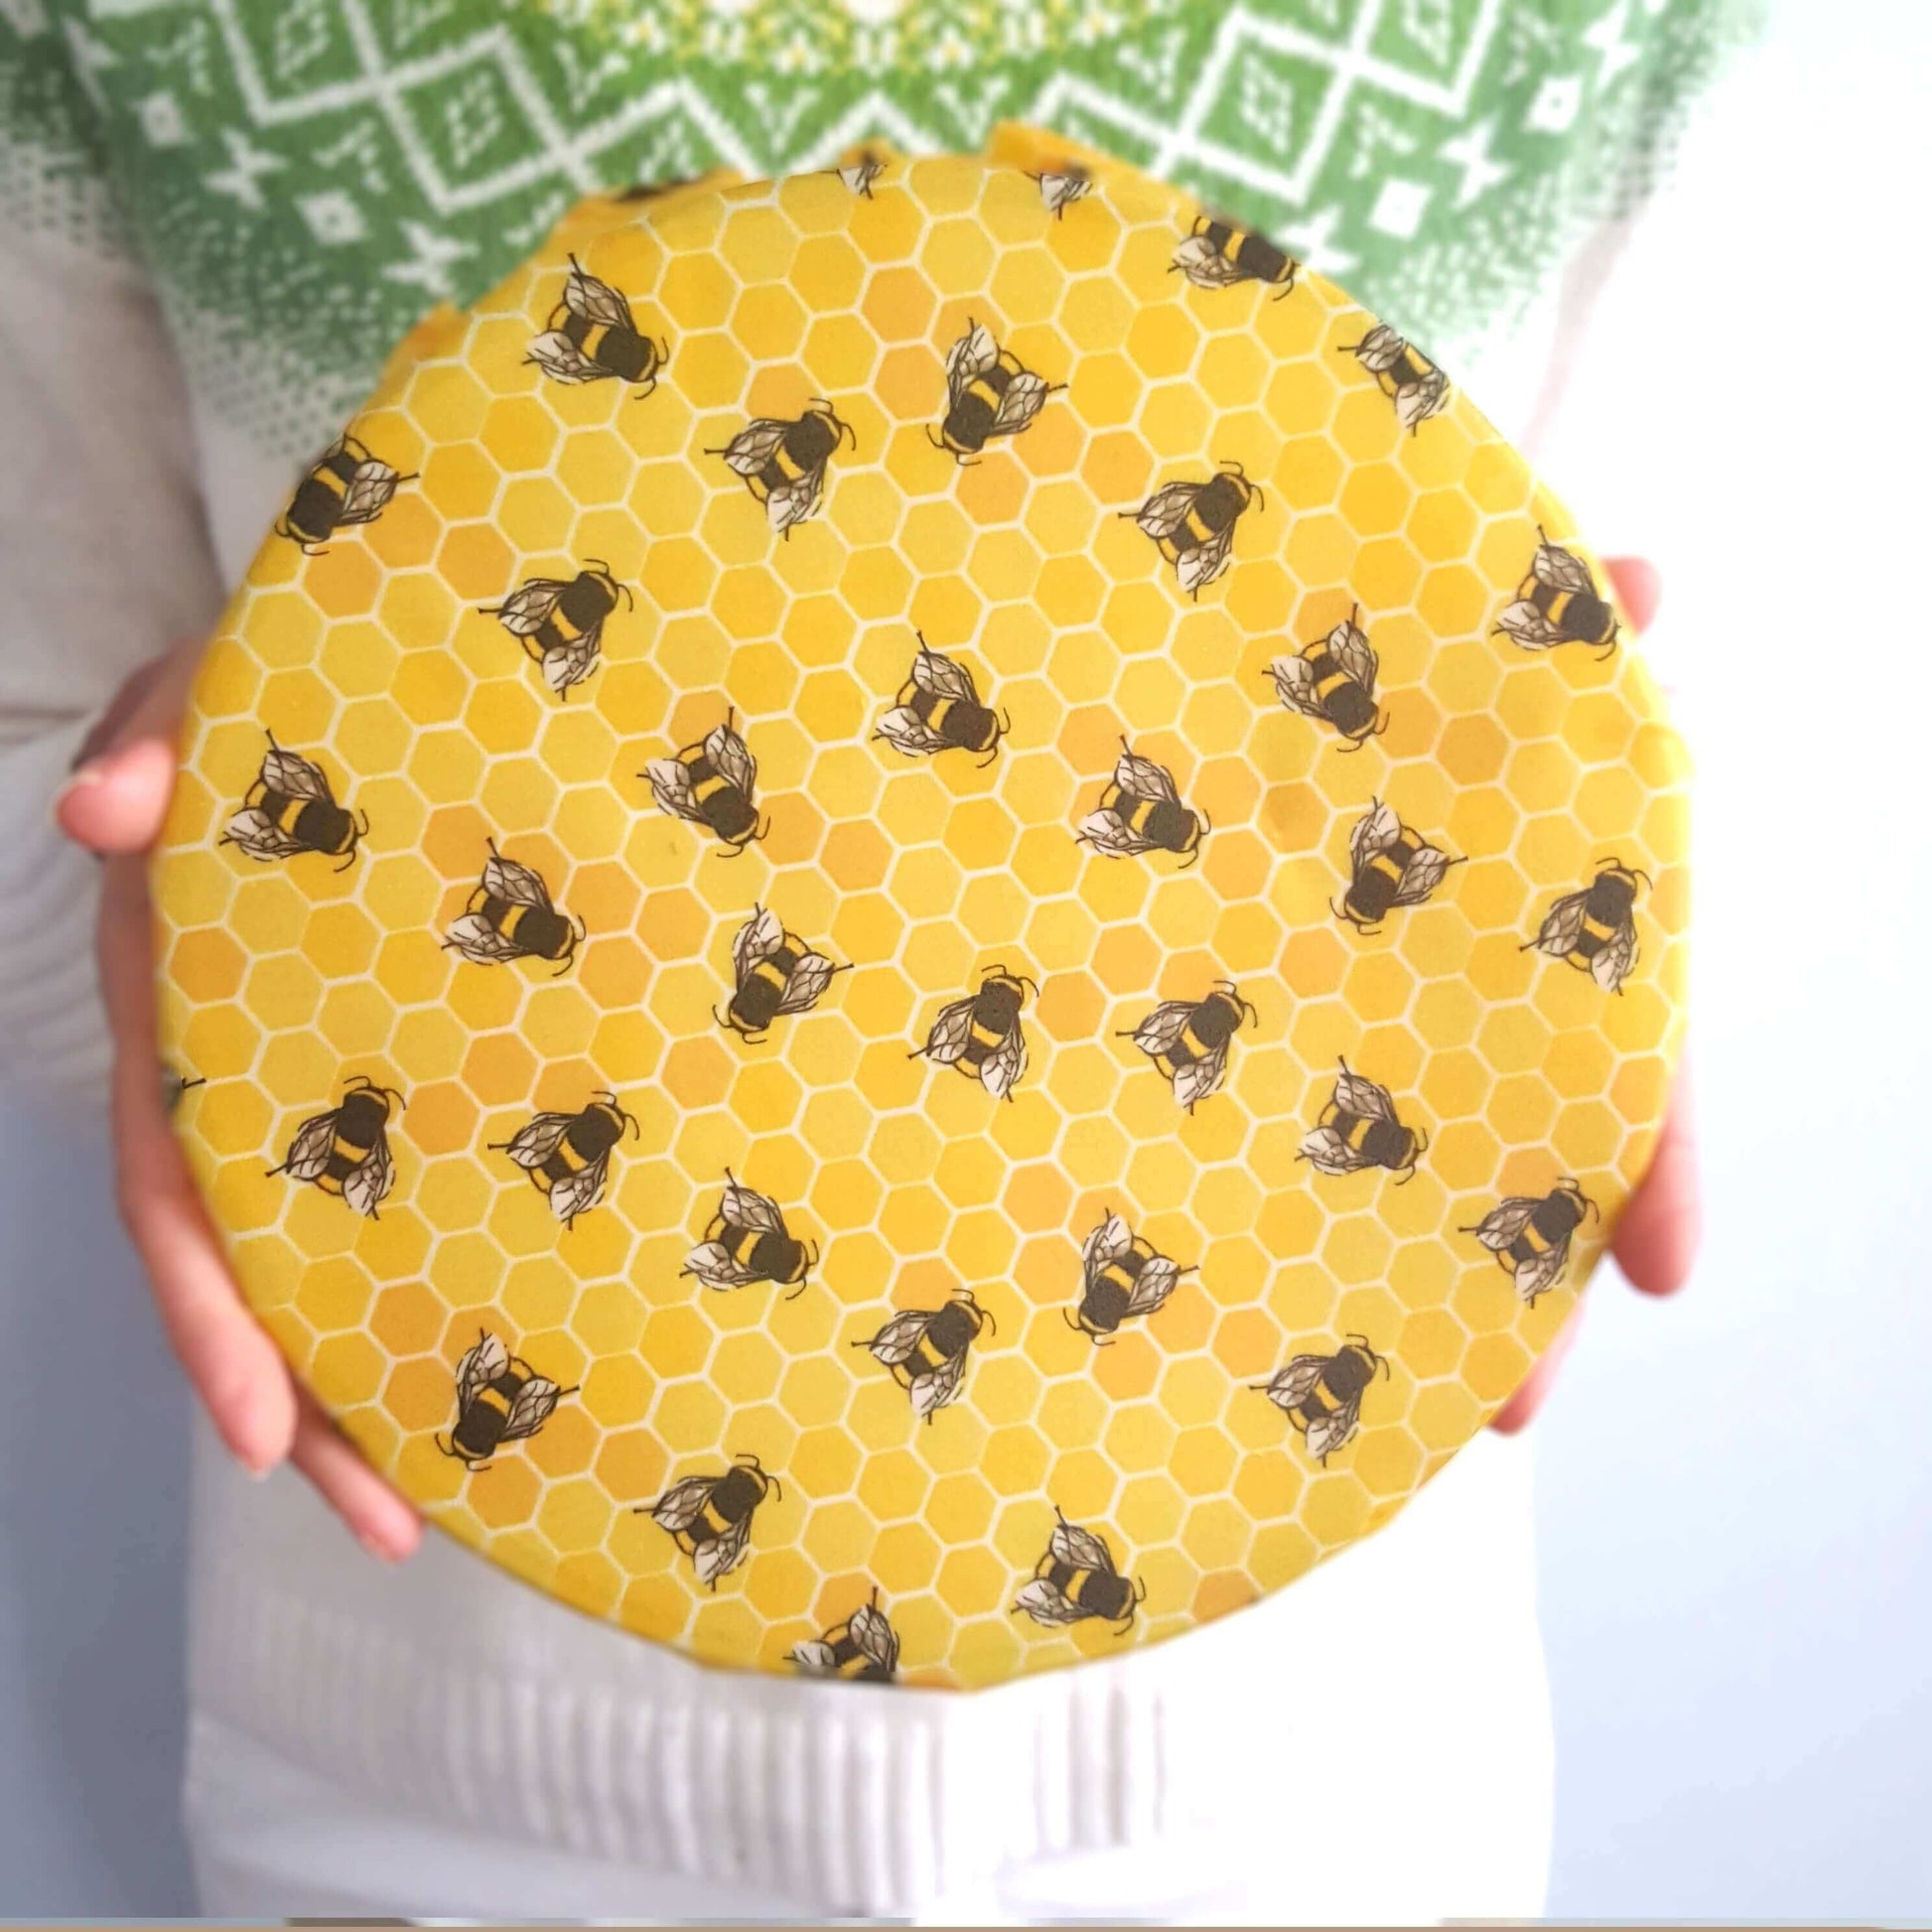 Sandwich & Bowl Set of 2 Large beeswax wraps shown in use